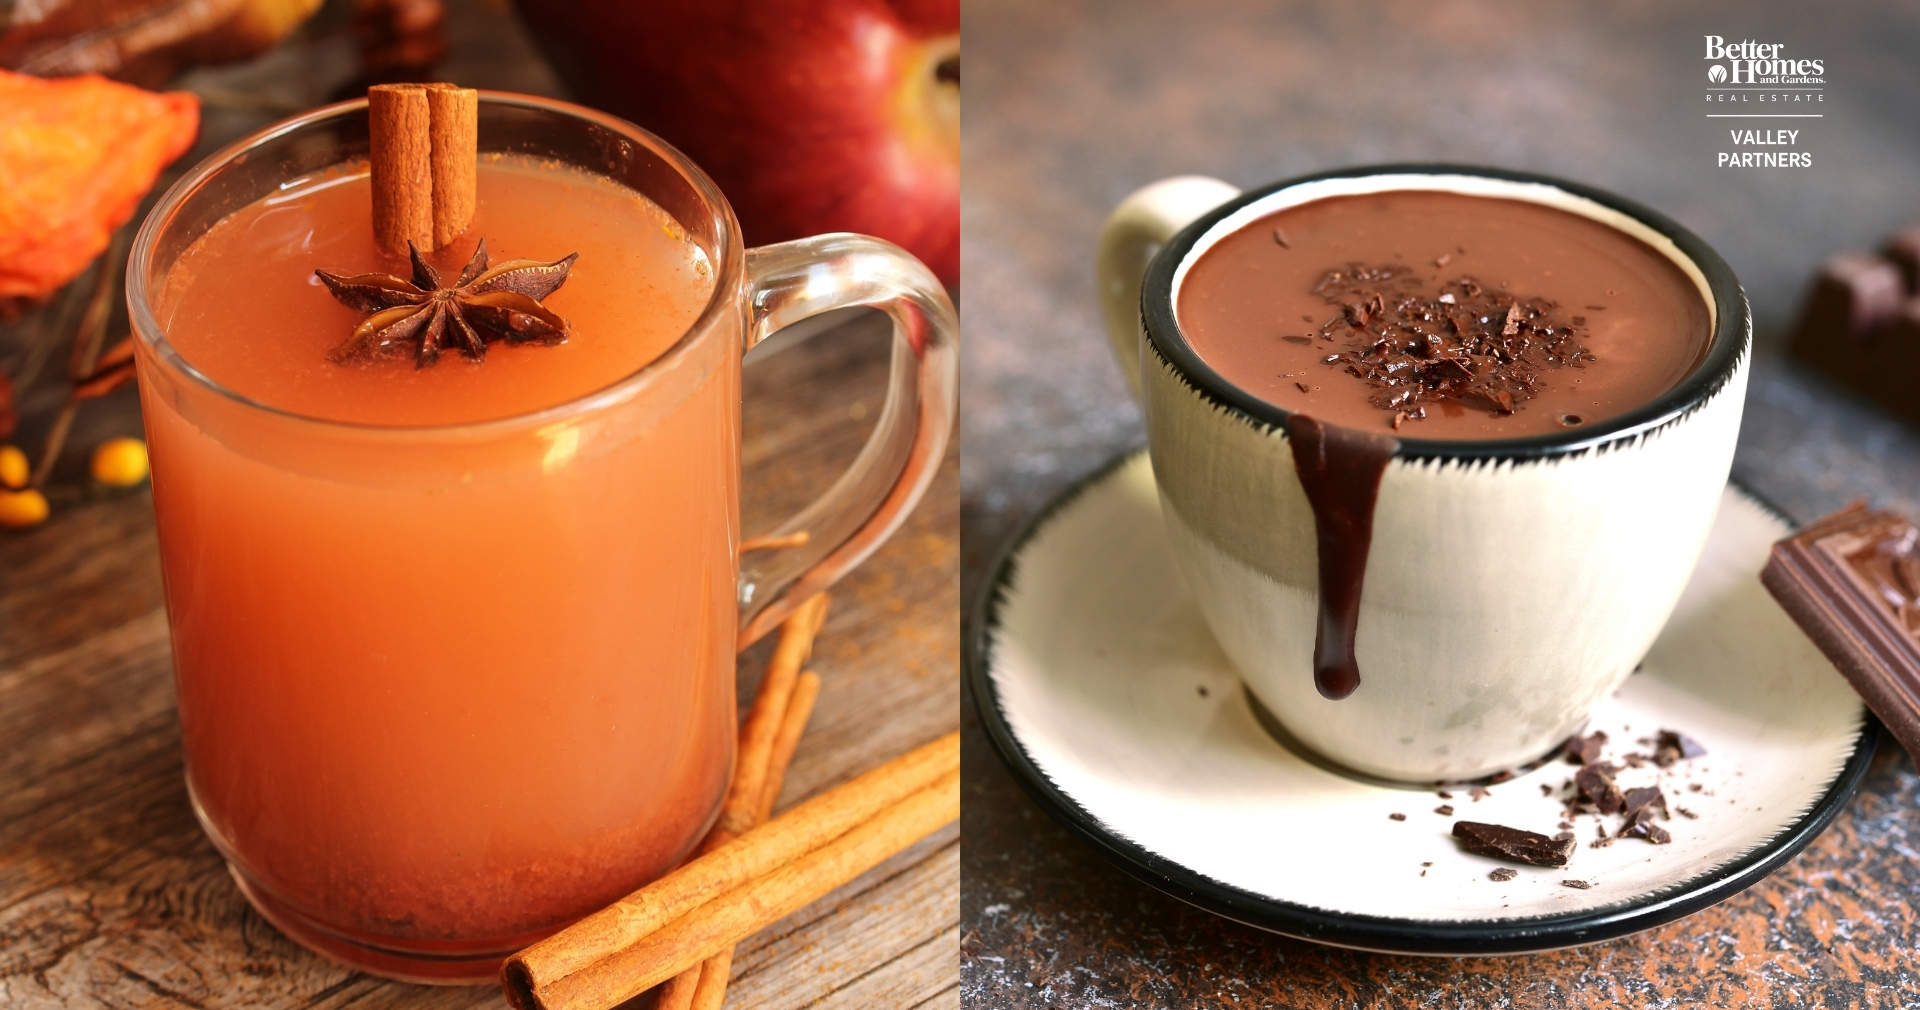 Apple Cider and Hot Chocolate